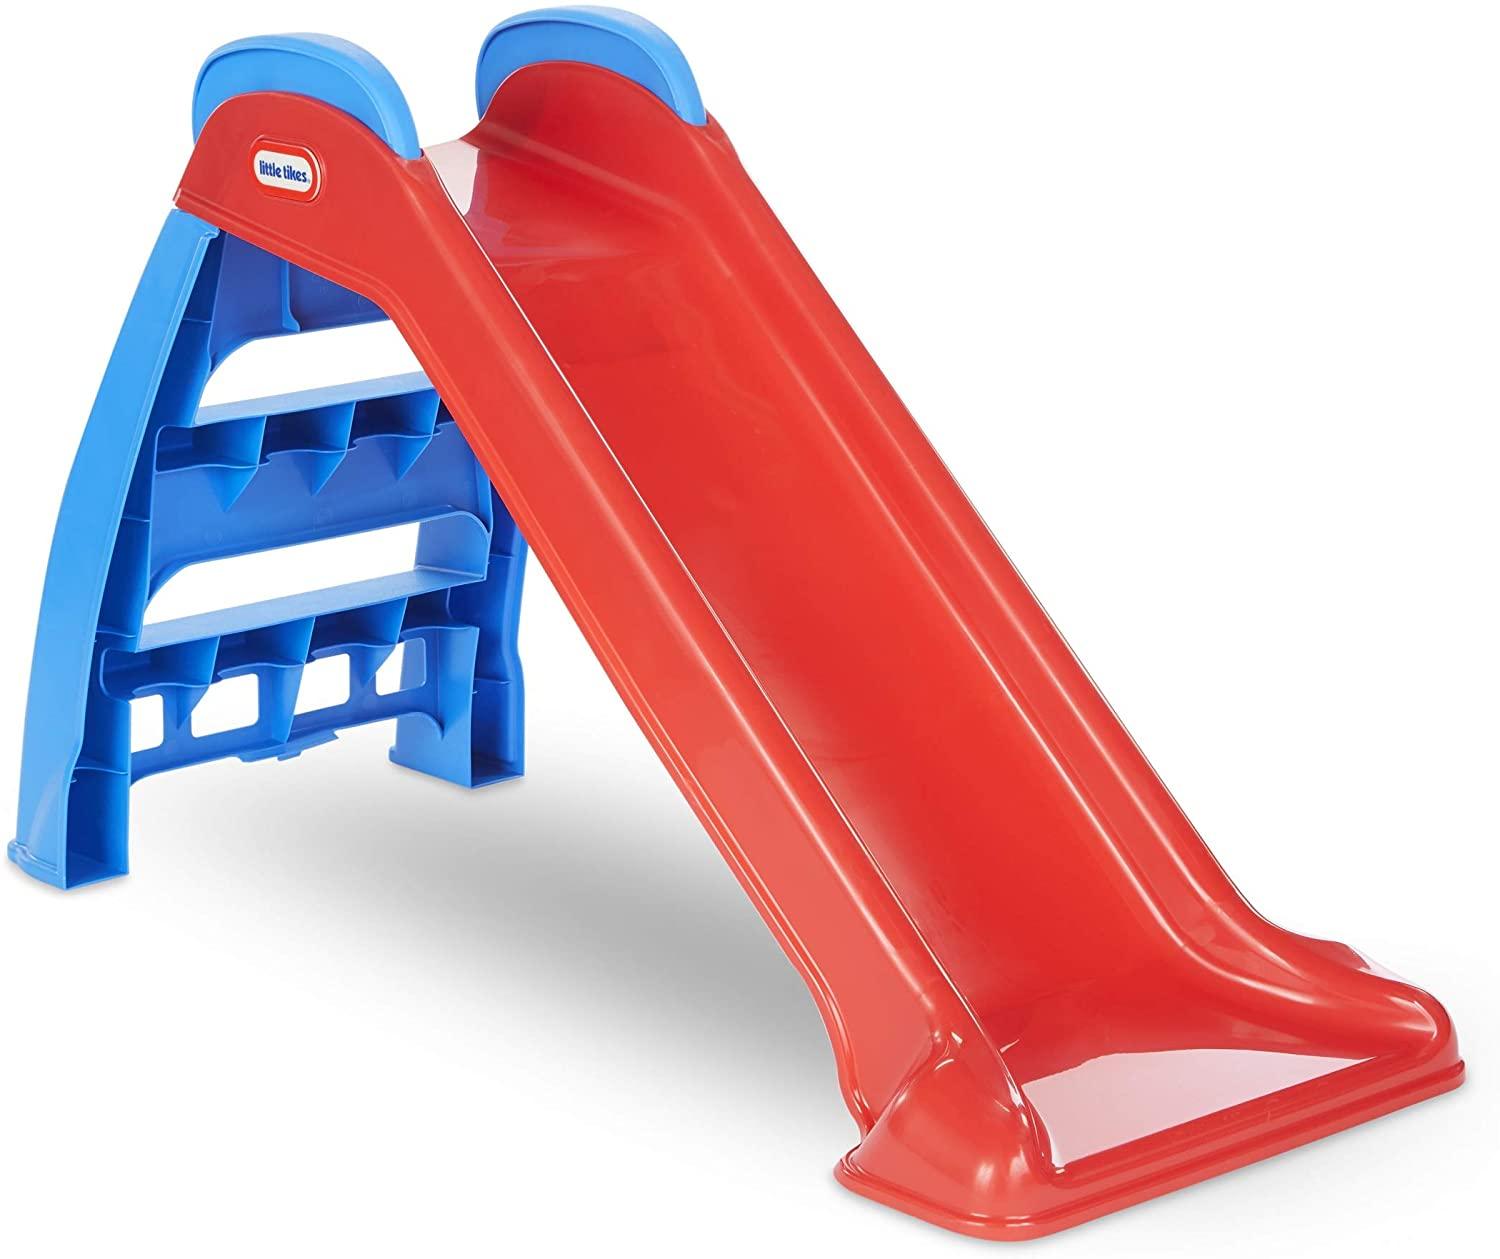 Little Tikes First Slide for $24.99